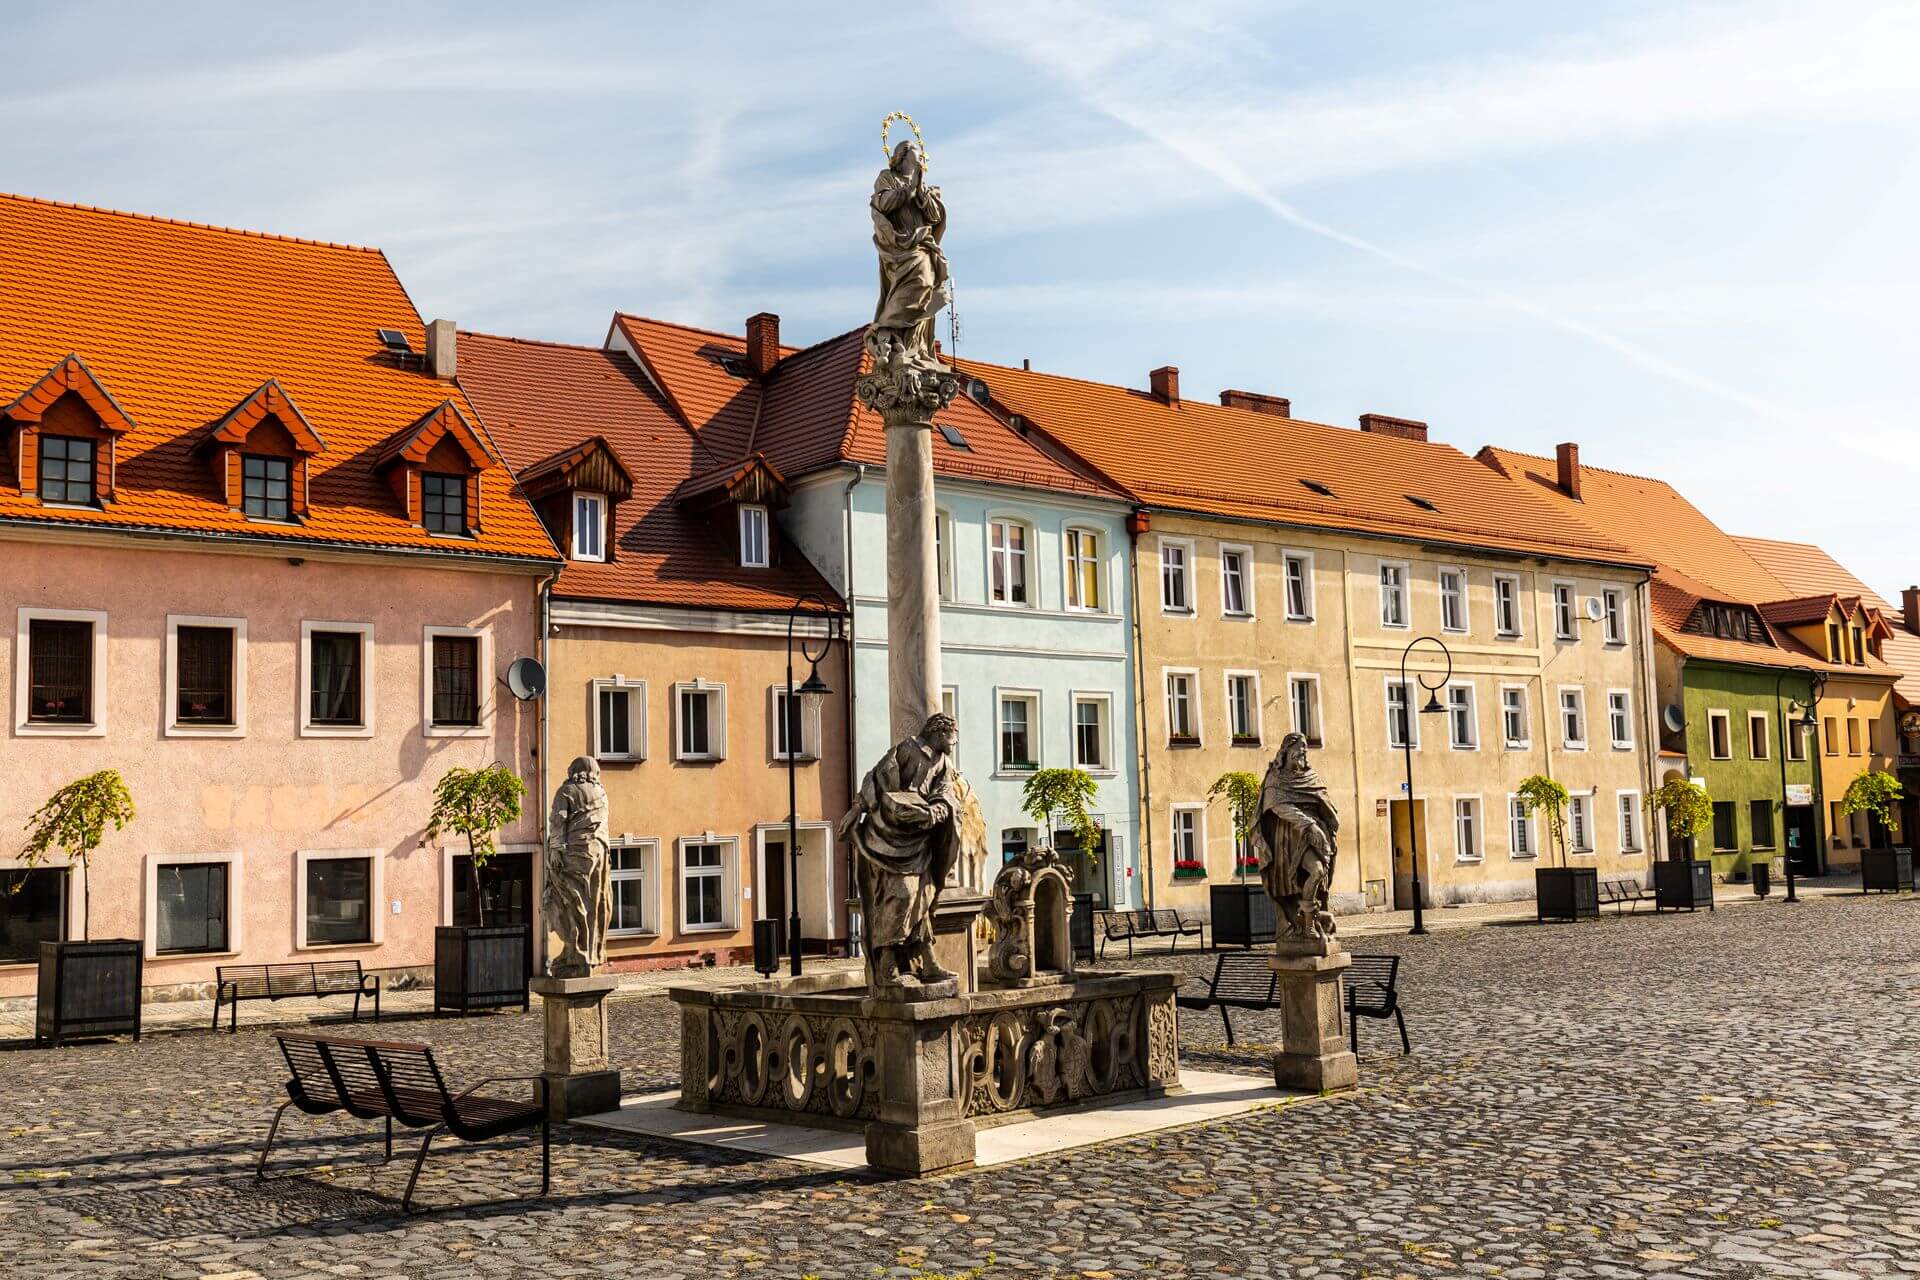 The old town of Lubomierz, Lower Silesia, visited on a Slow Cyclist trip in Poland